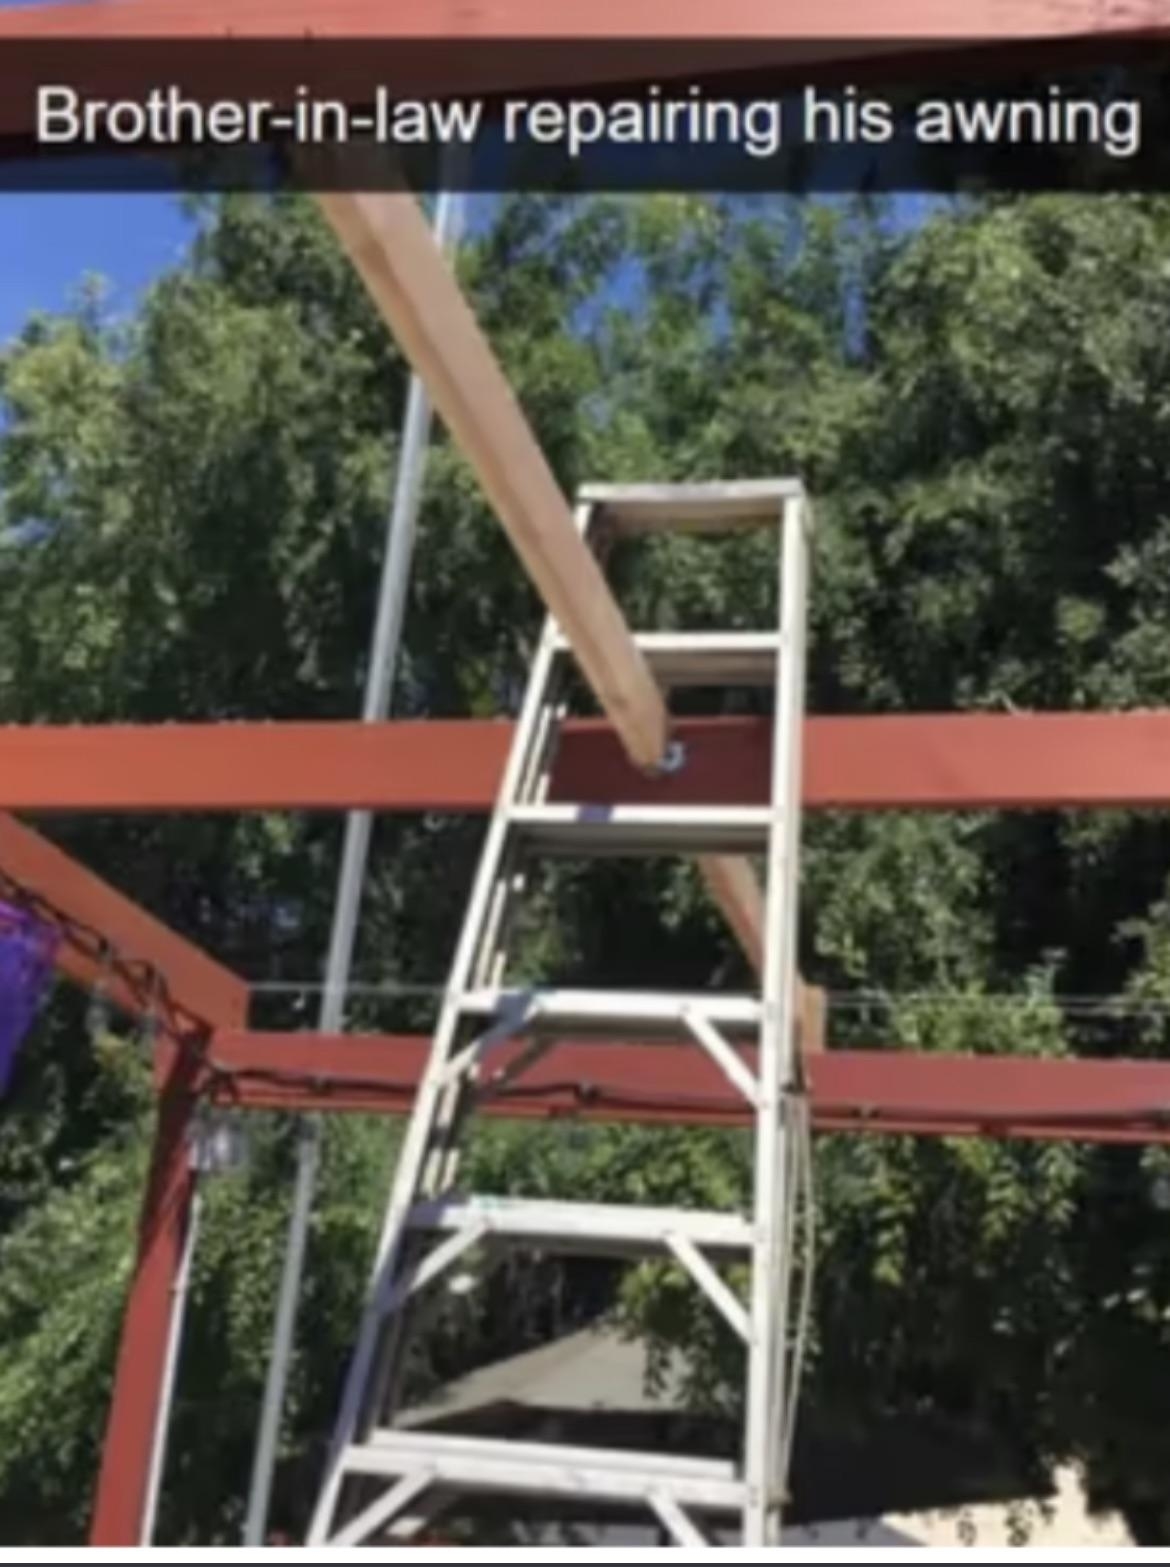 Wooden piece of awning goes right through the large ladder